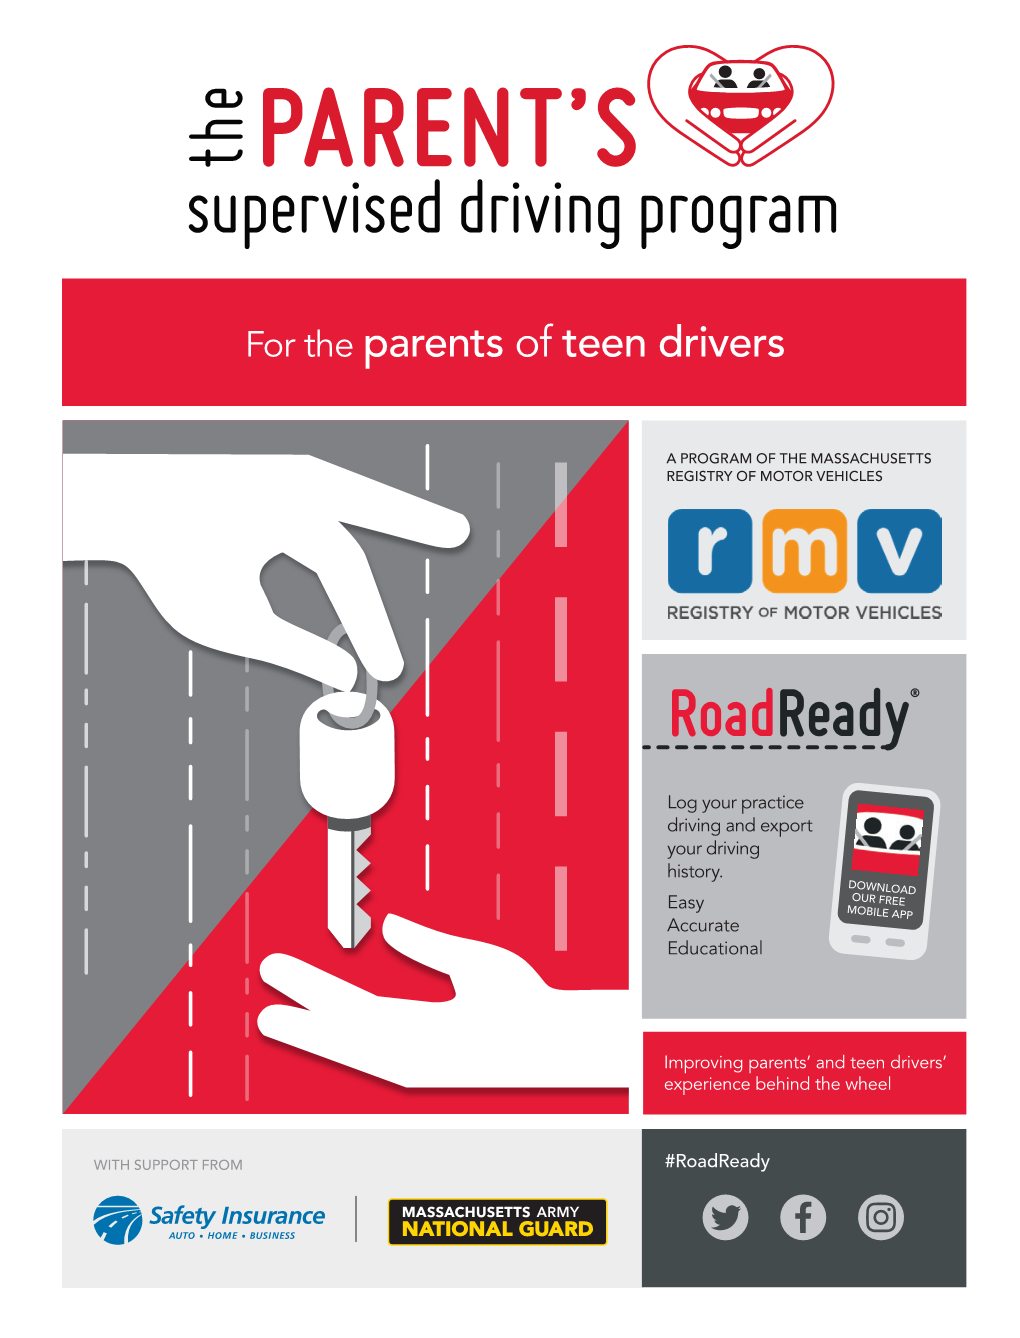 The Parents' Supervised Driving Program